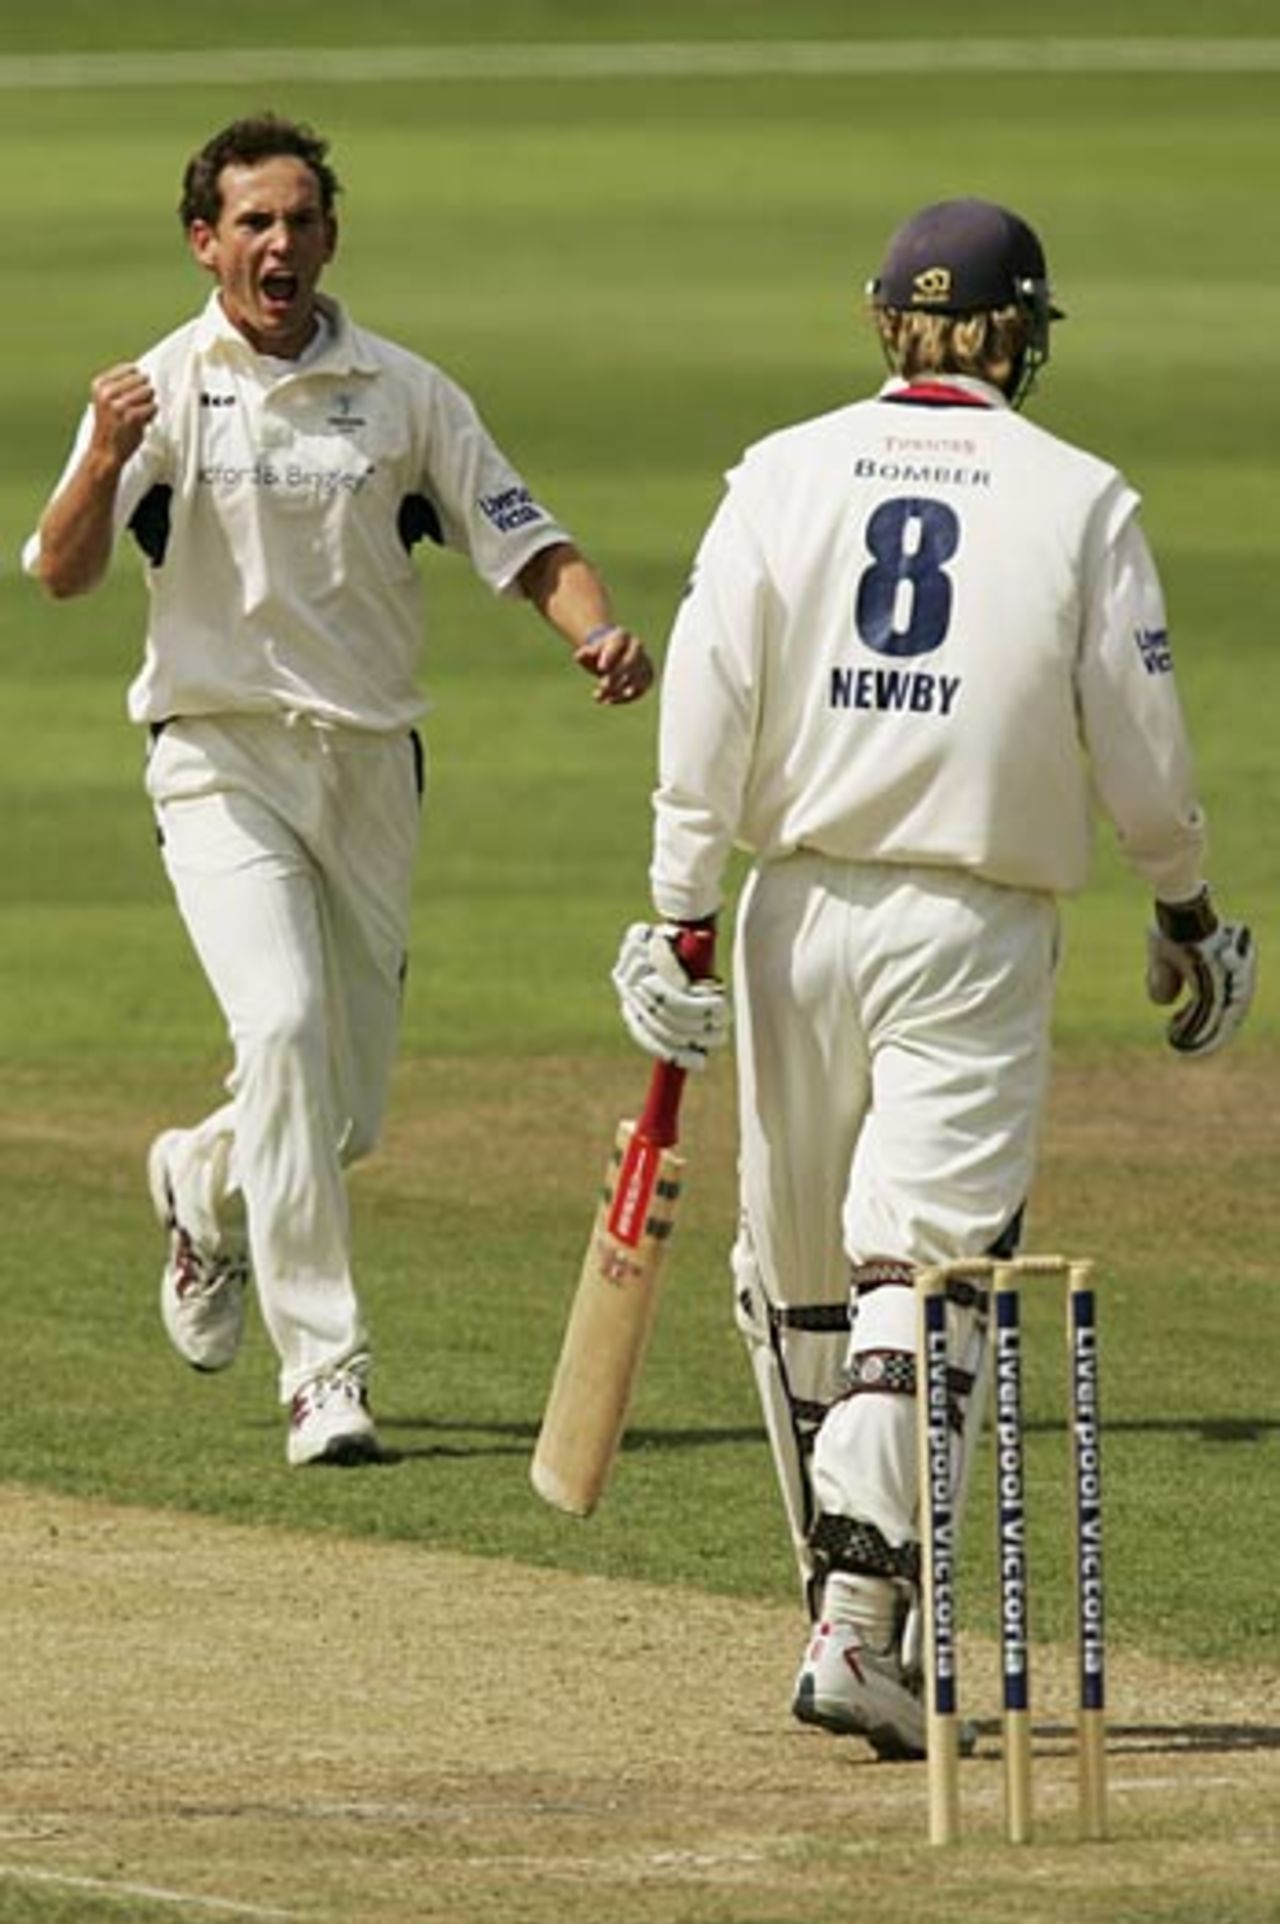 Deon Kruis removes Oliver Newby and finished with a five-wicket haul, Lancashire v Yorkshire, Old Trafford, August 10, 2006